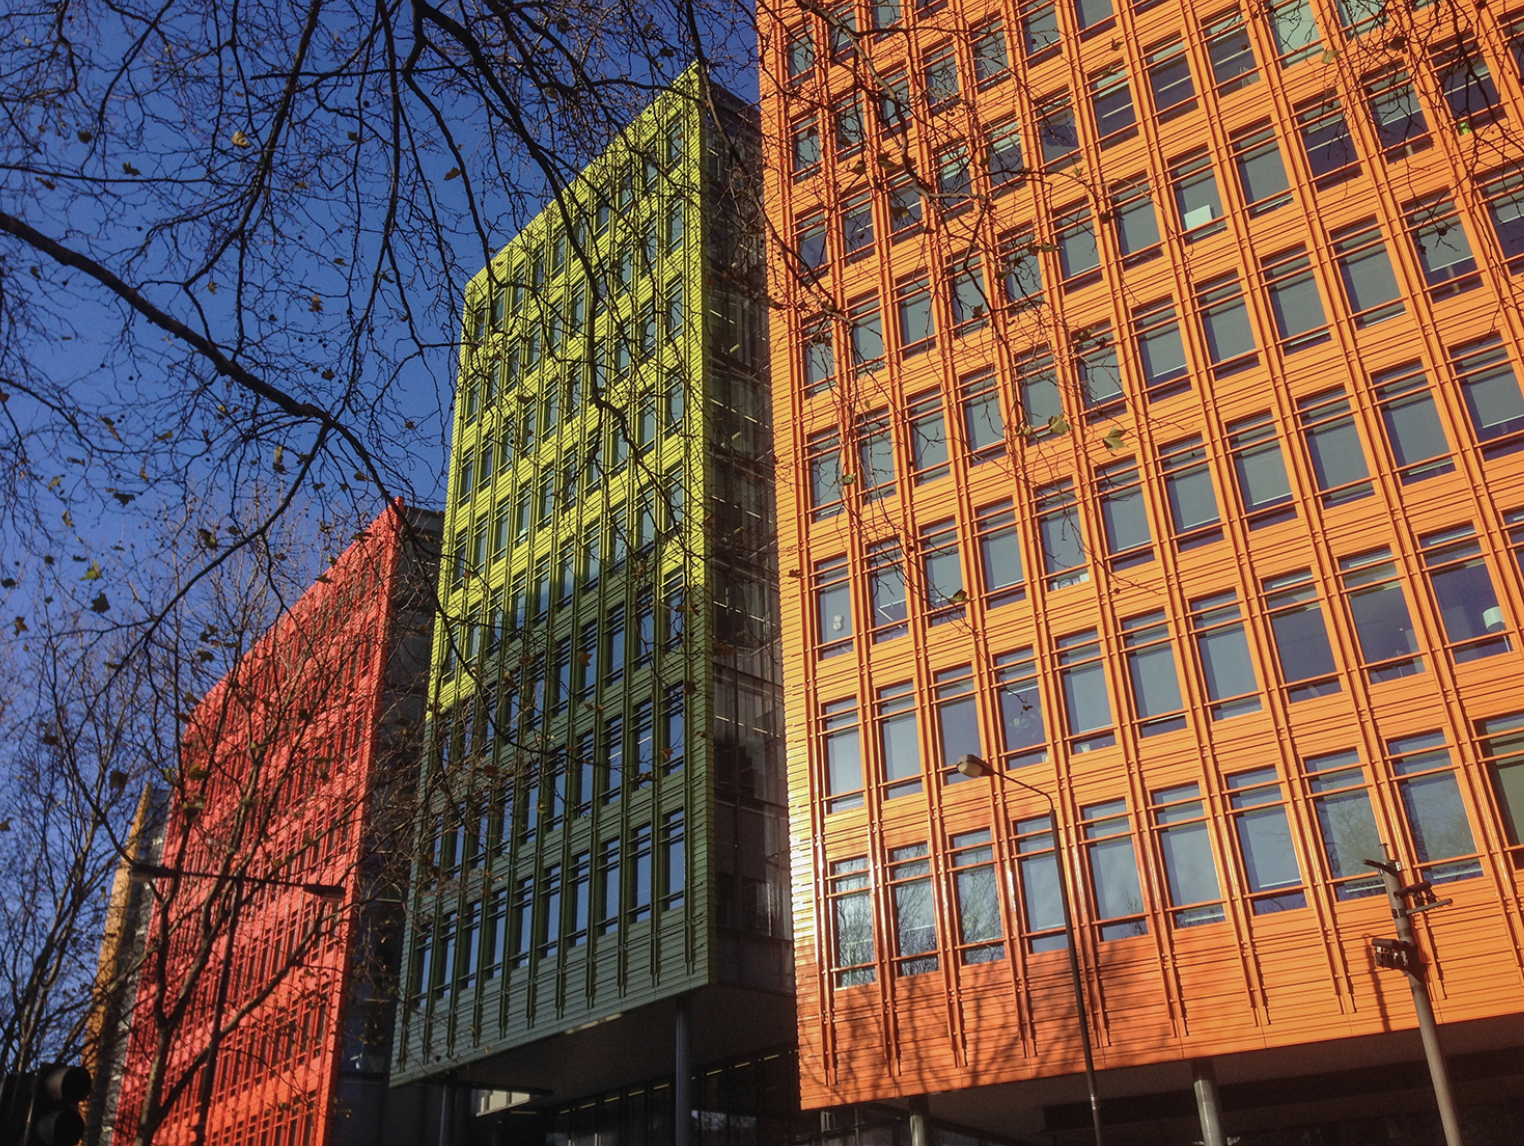 Google to Purchase Central Saint Giles Site